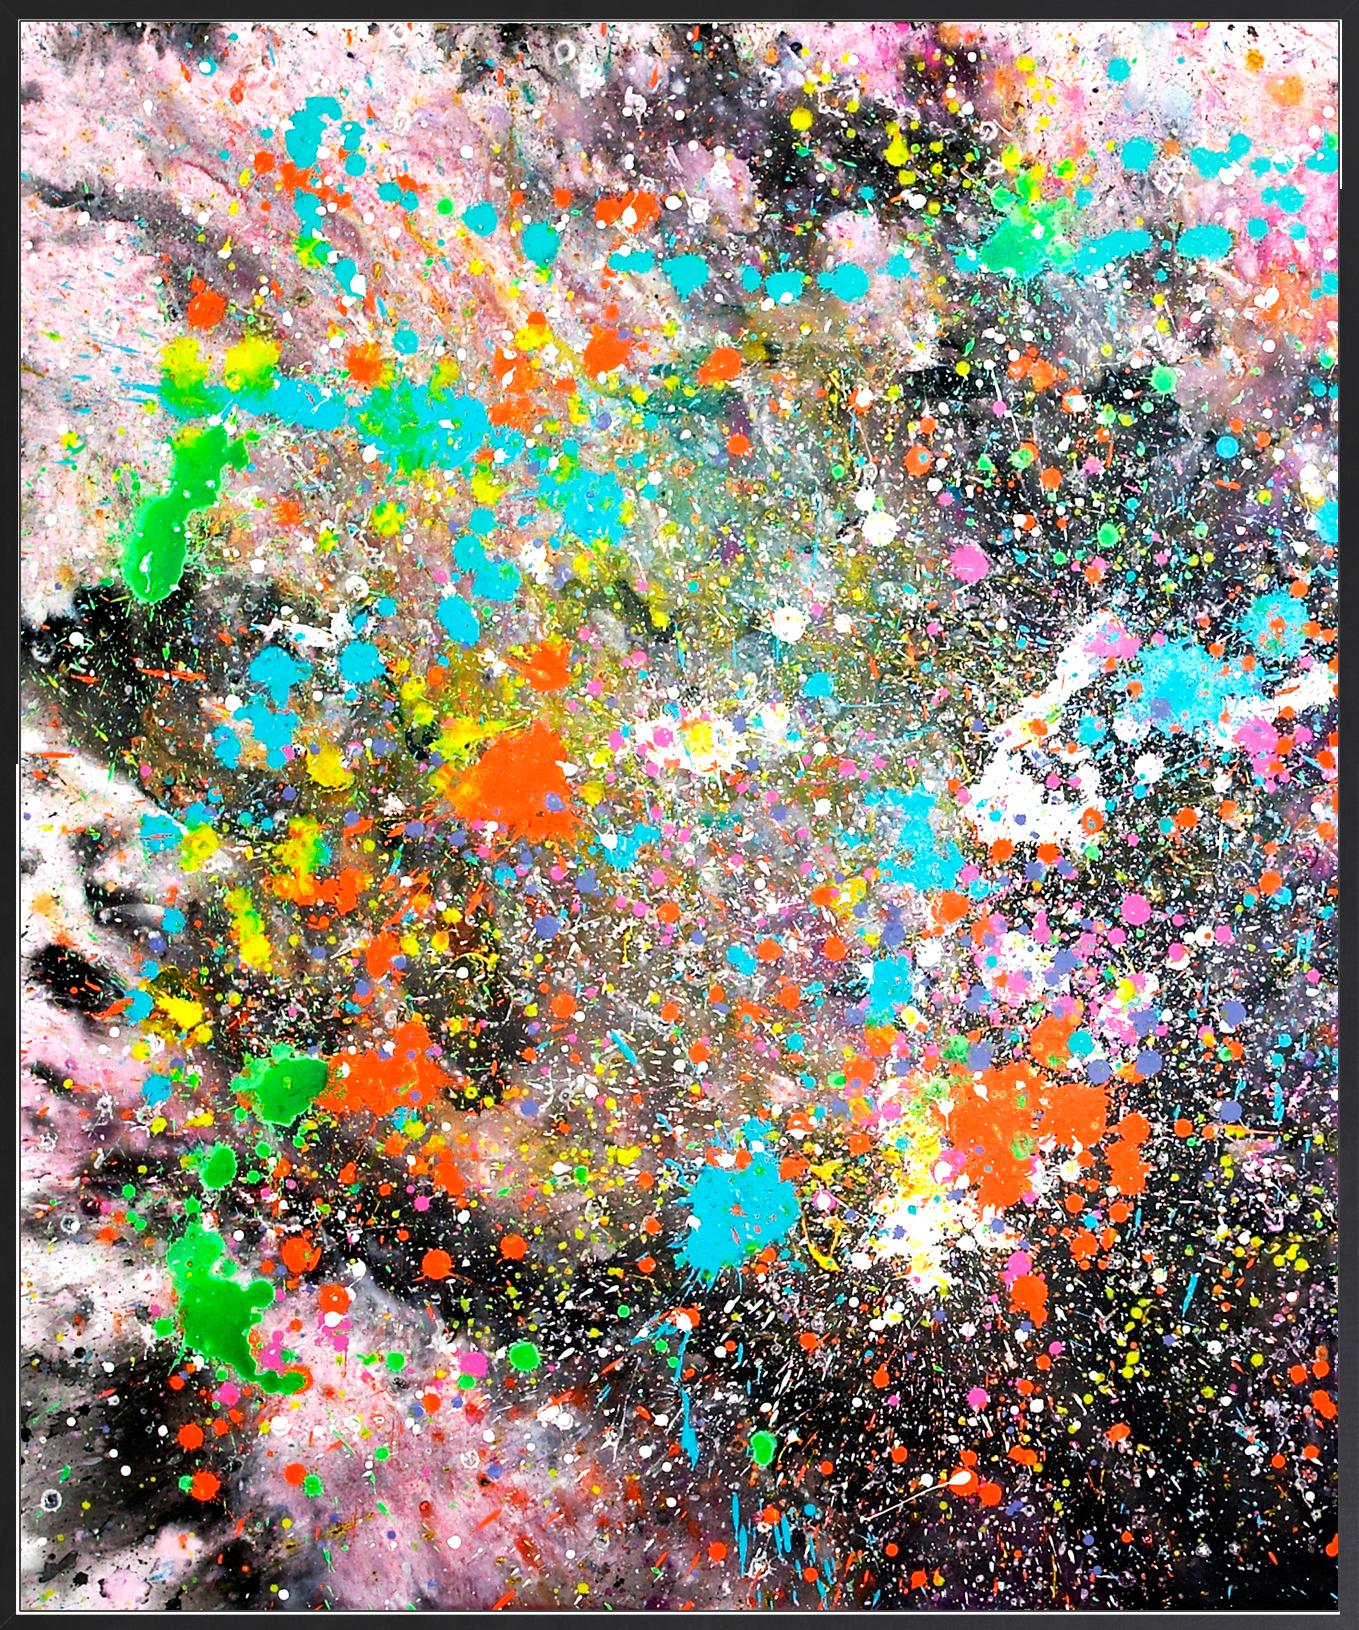 This is a very large triple canvas work that fills a large wall. It is influenced by the formation of stars in a stellar nursery, and has a sense of beginning. The work is full of vibrant colours that will warm any space and make the space also feel